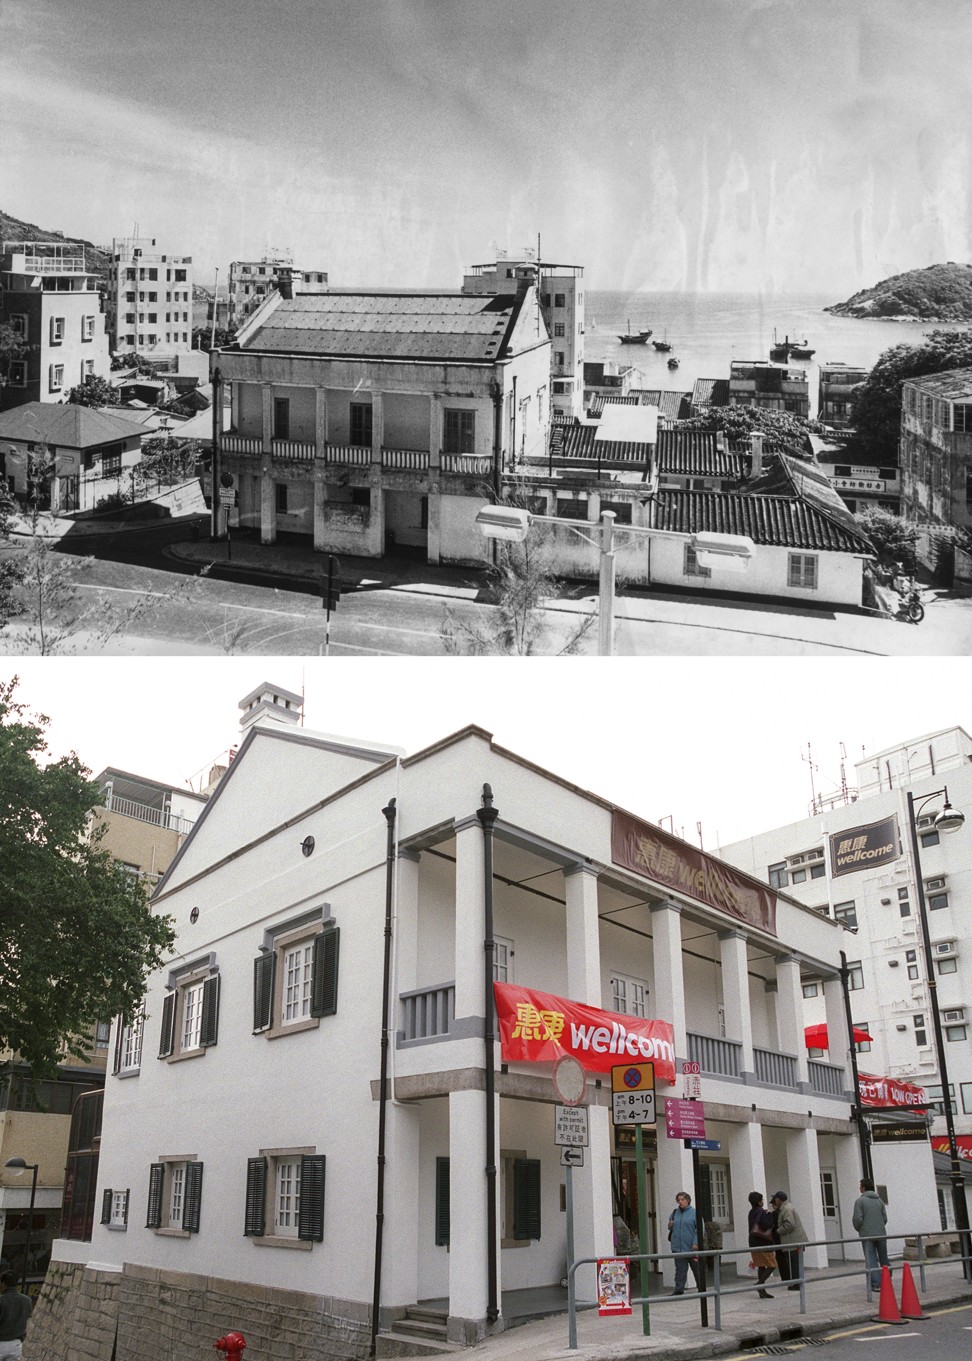 The old Stanley Police Station (top) in 1977 and its current guise as a Wellcome supermarket. Photo: SCMP